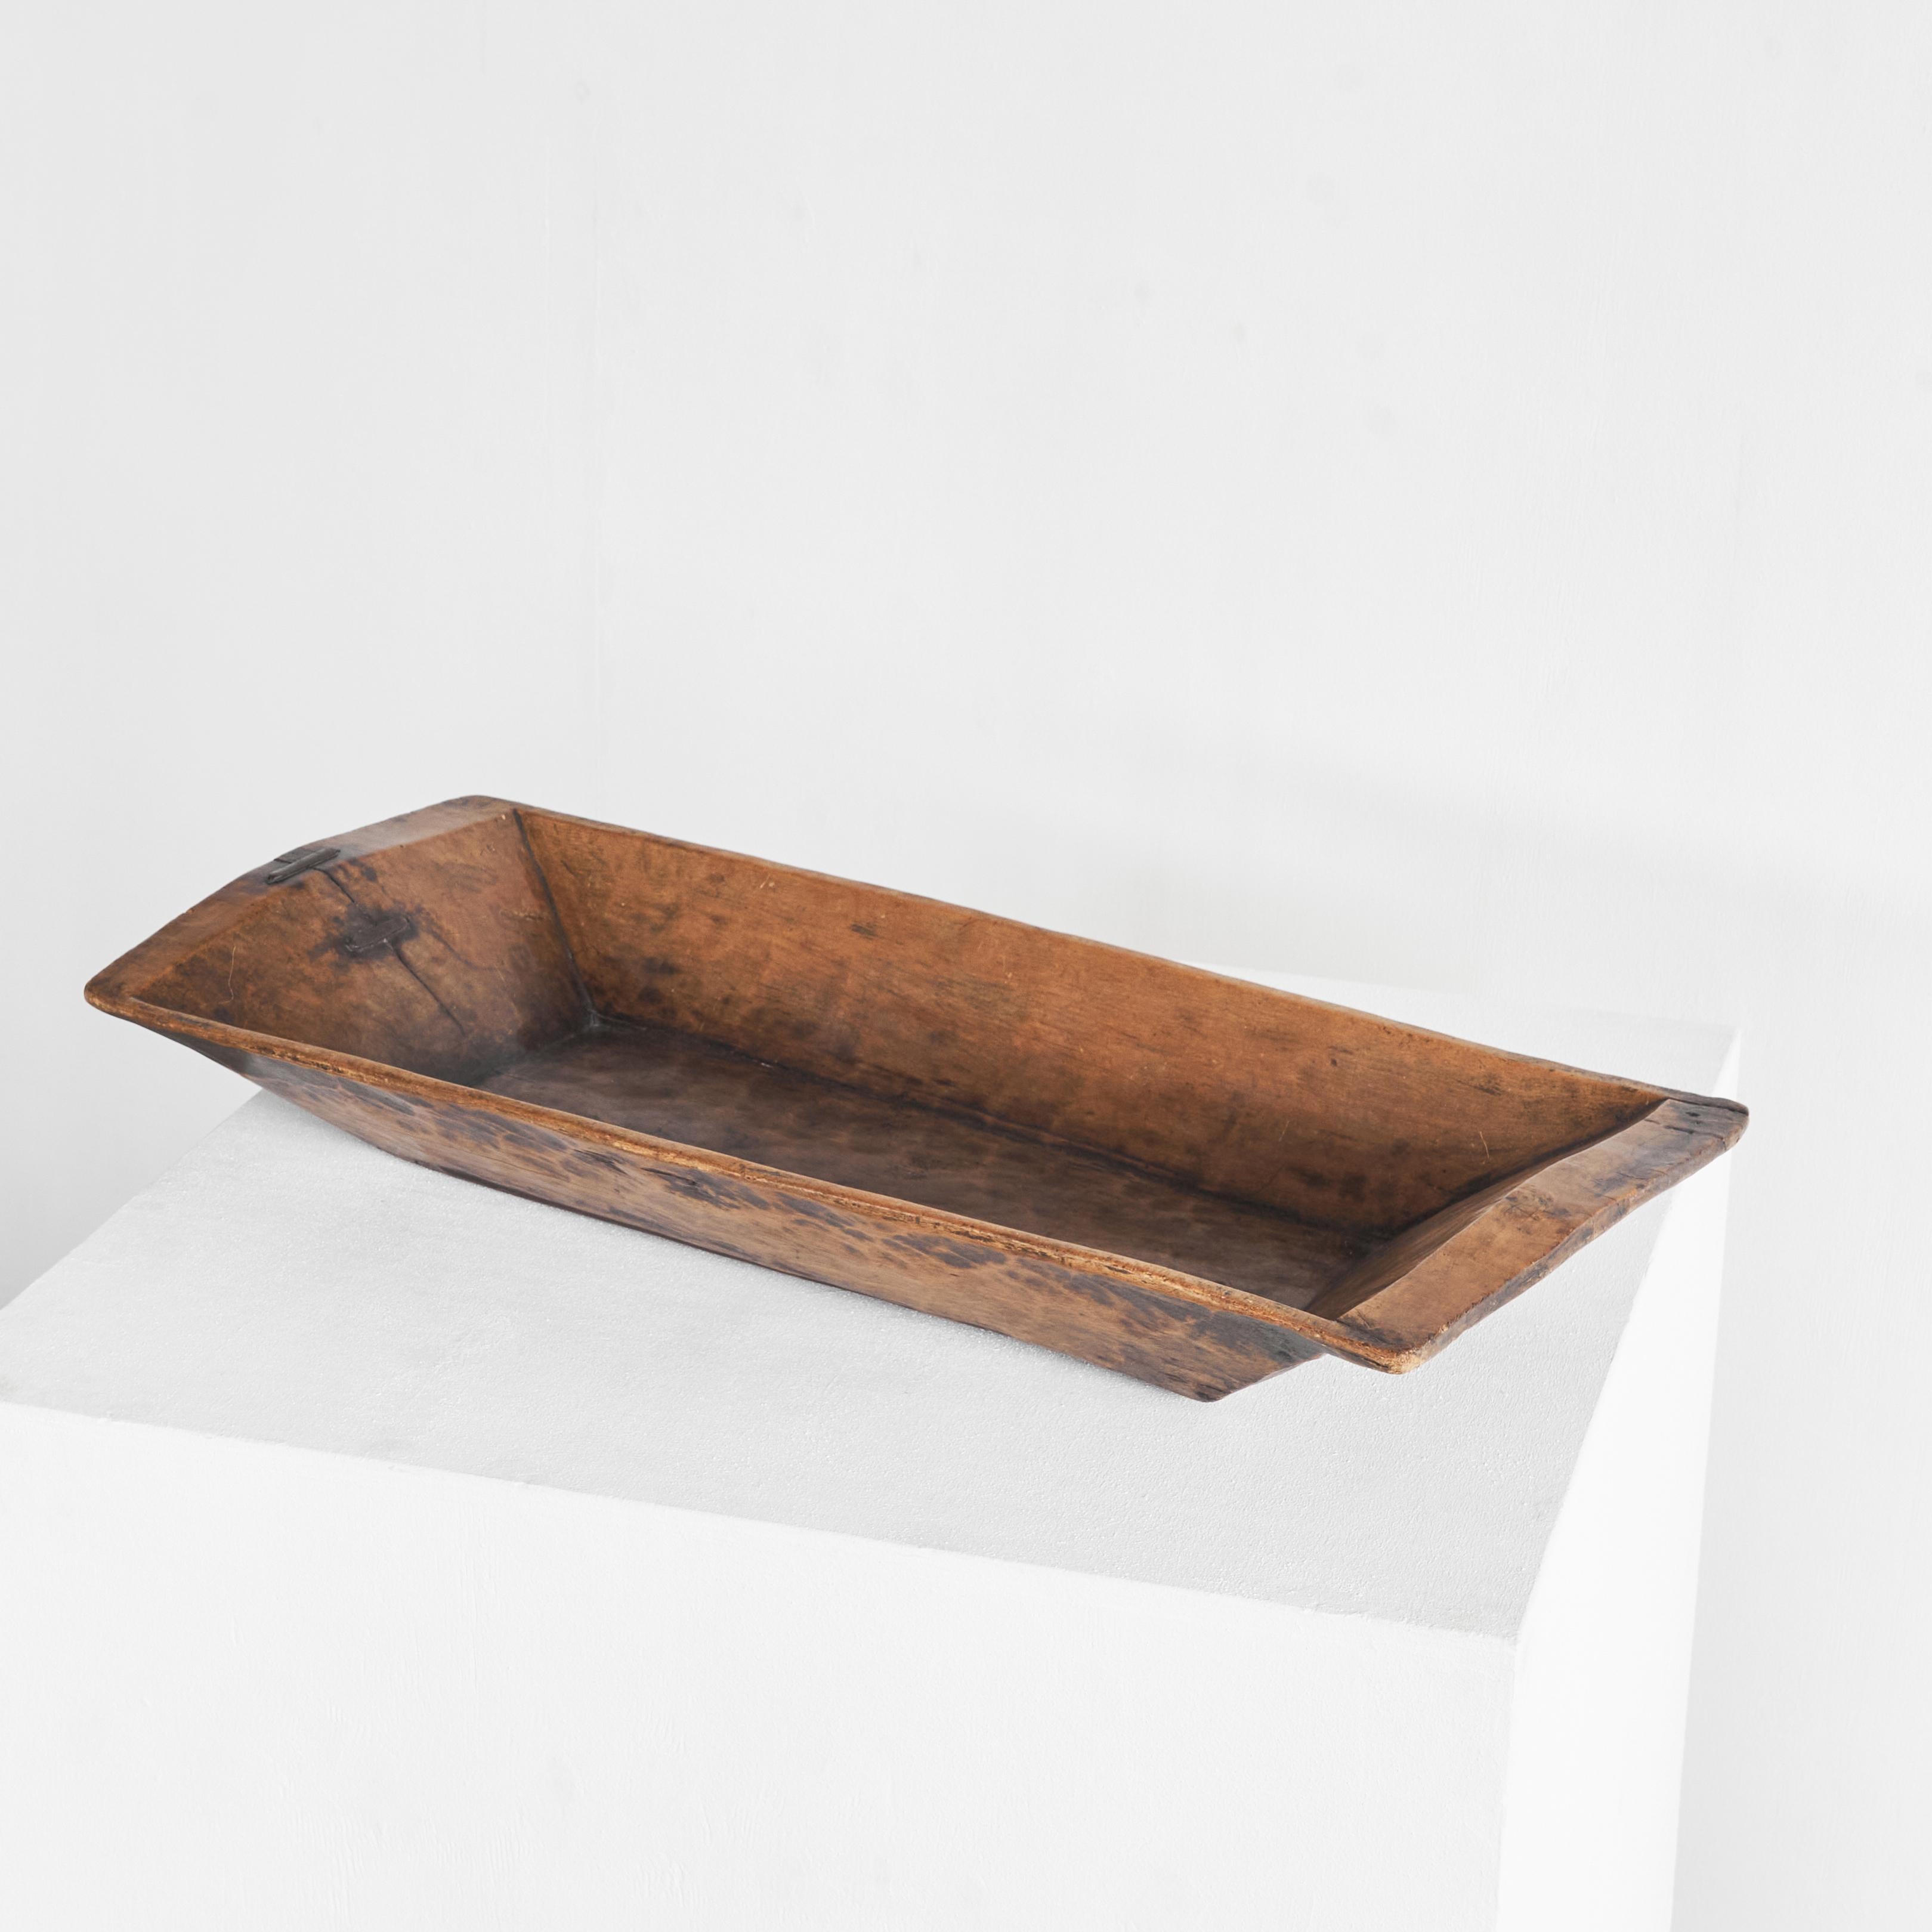 Monumental Antique Hand Carved Wooden Trough or Bowl Wabi Sabi, 19th Century For Sale 1